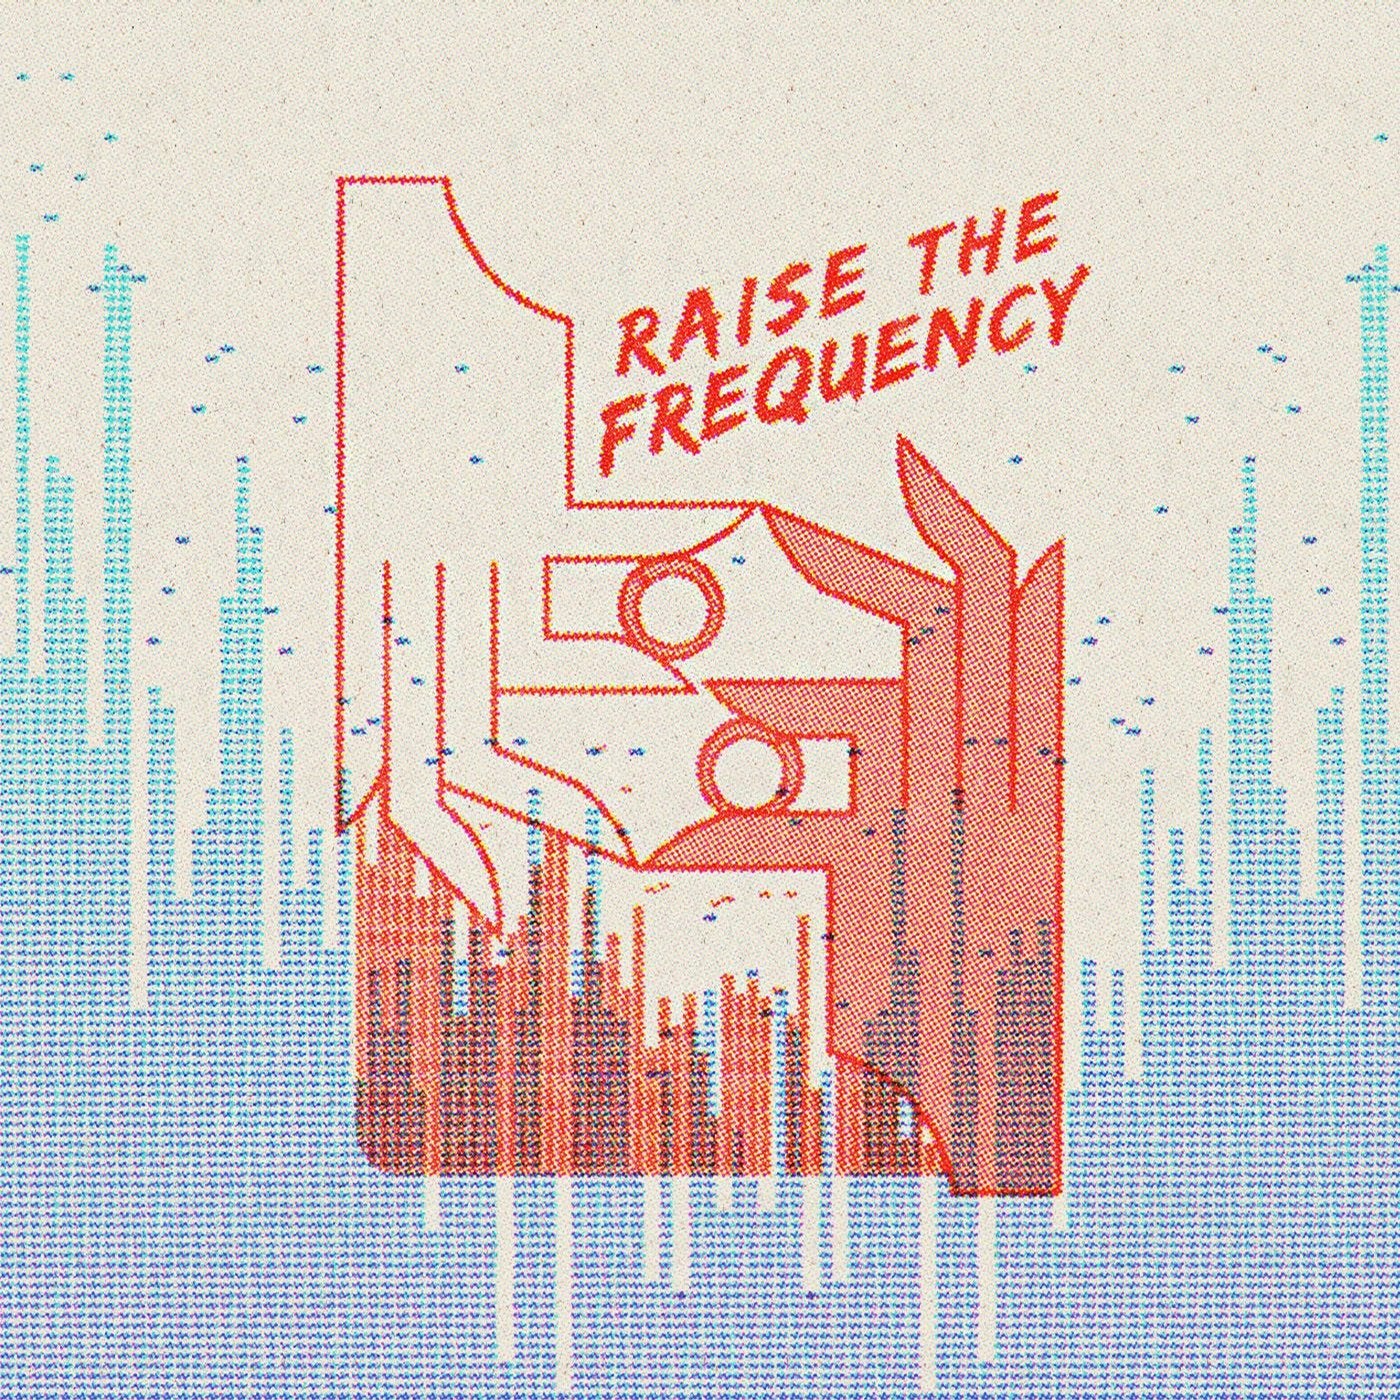 Raise the Frequency